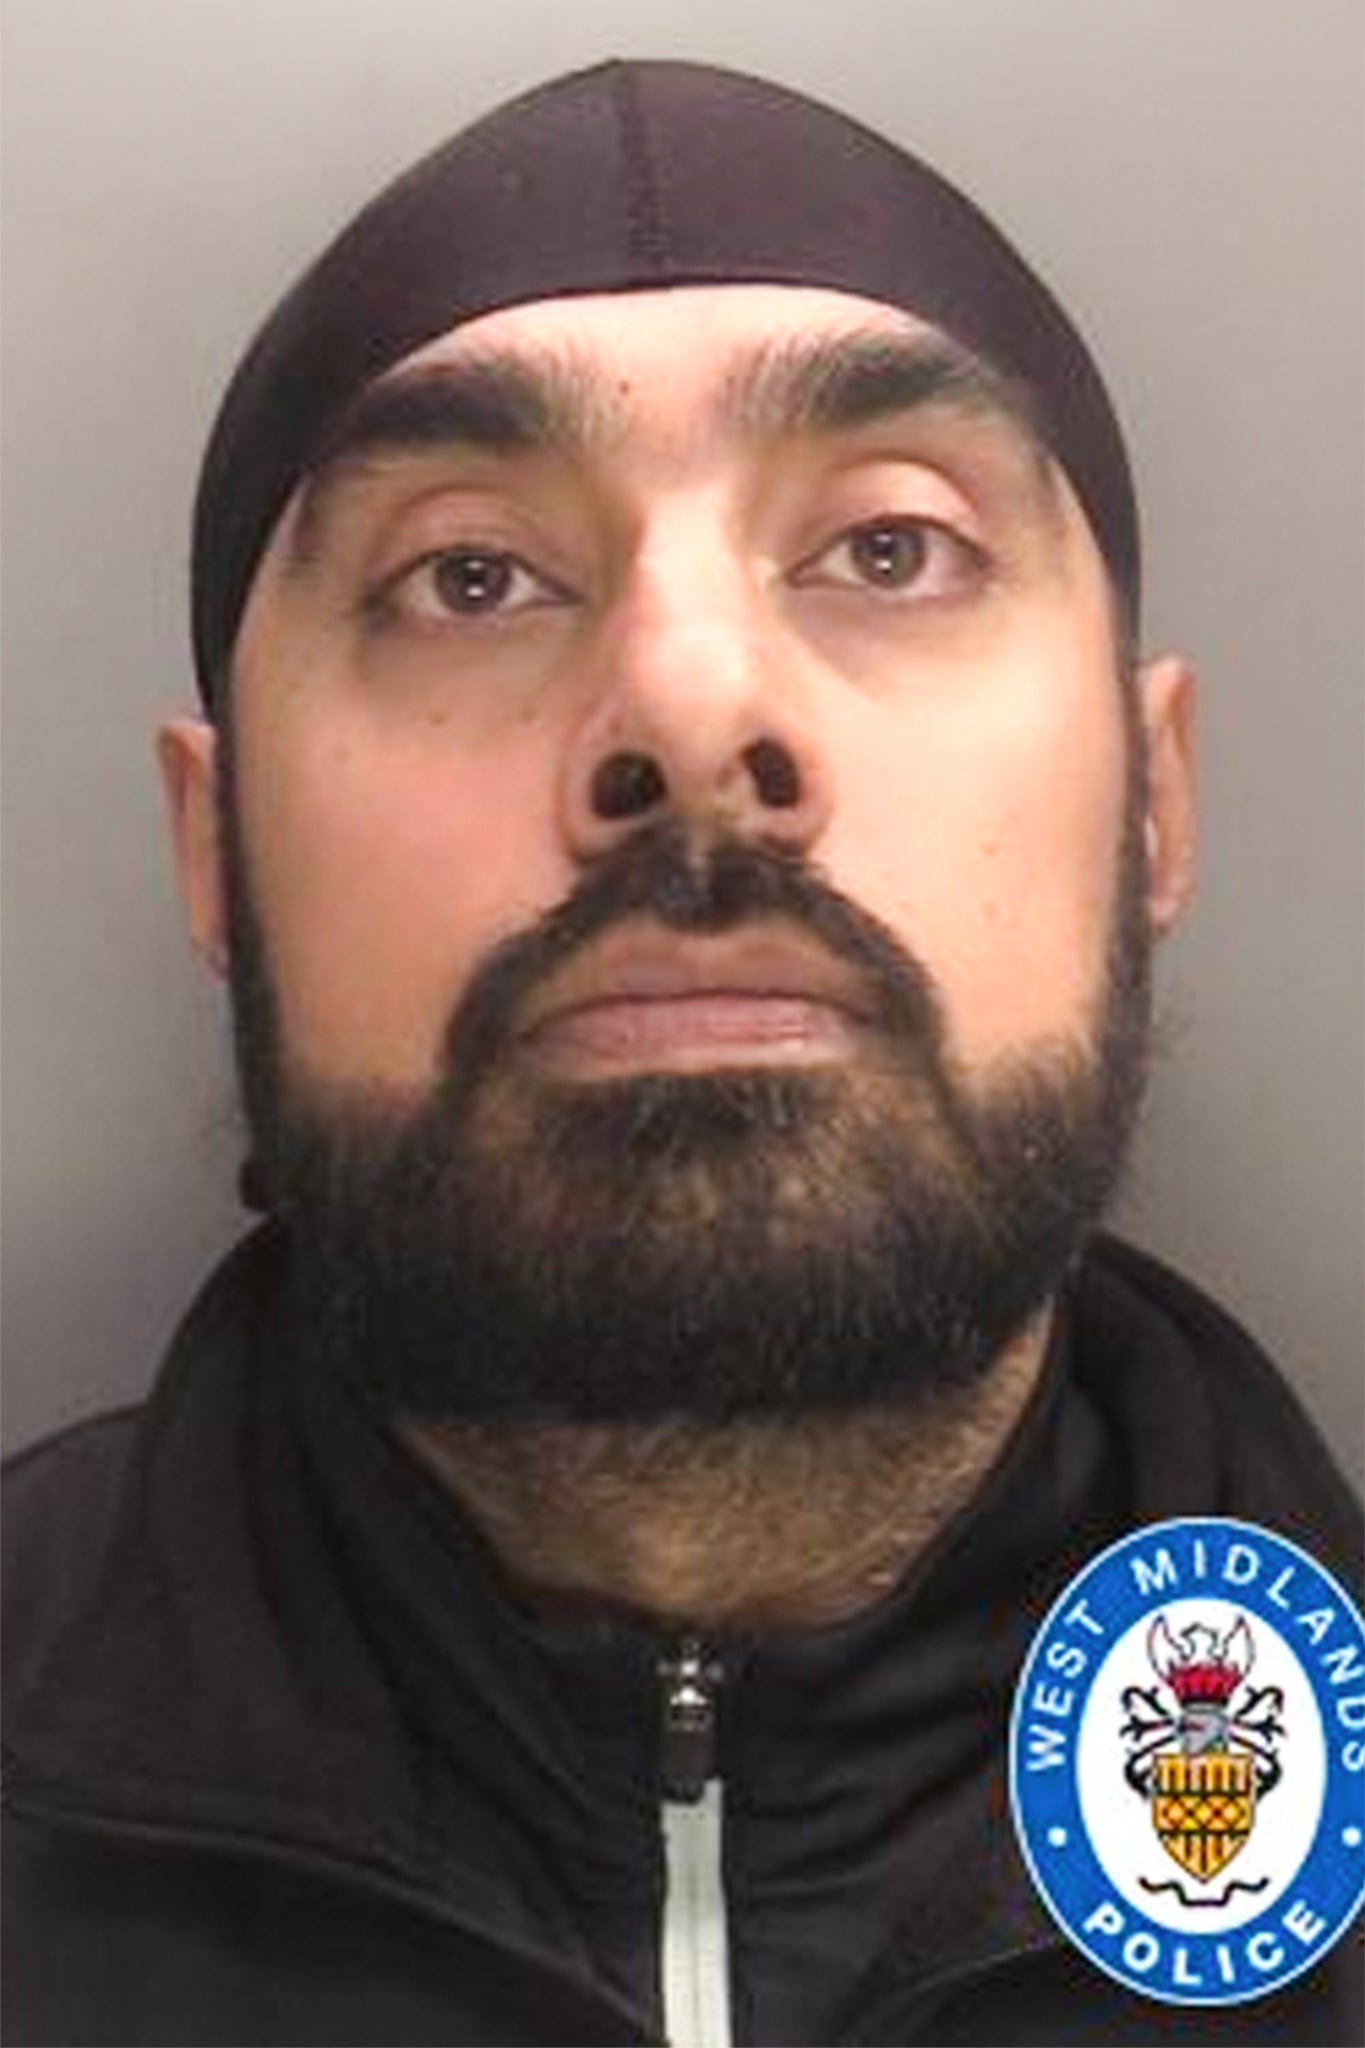 Sukvinder Mannan was sentenced to eight years in jail after being convicted of death by dangerous driving in 2015 - but released after four years